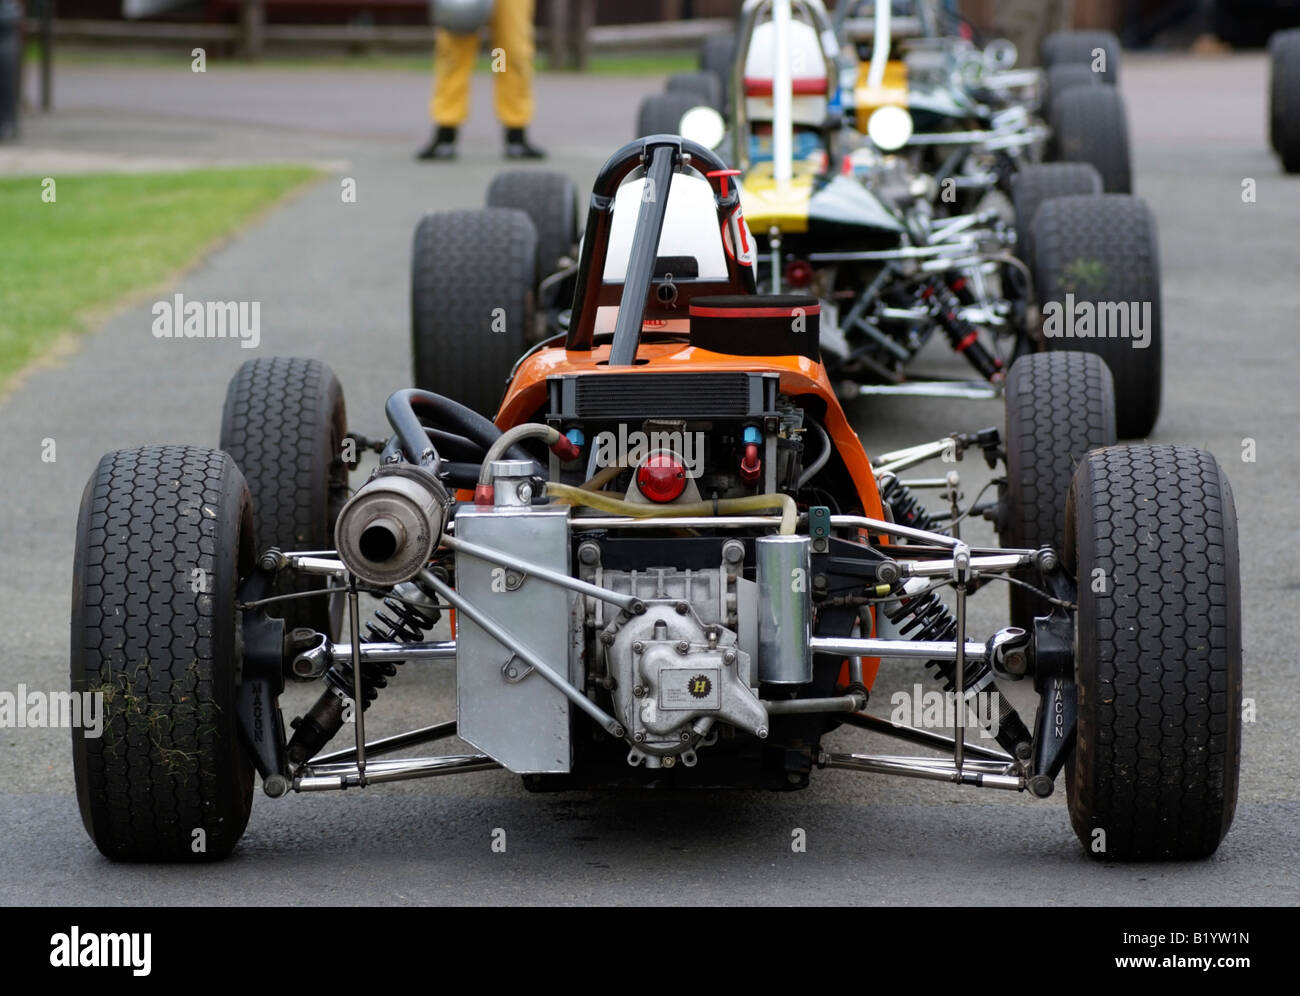 Classic racing and sports race cars in a queue wait to join the track at Prescott Speed Hill Climb in Gloucestershire England UK Stock Photo